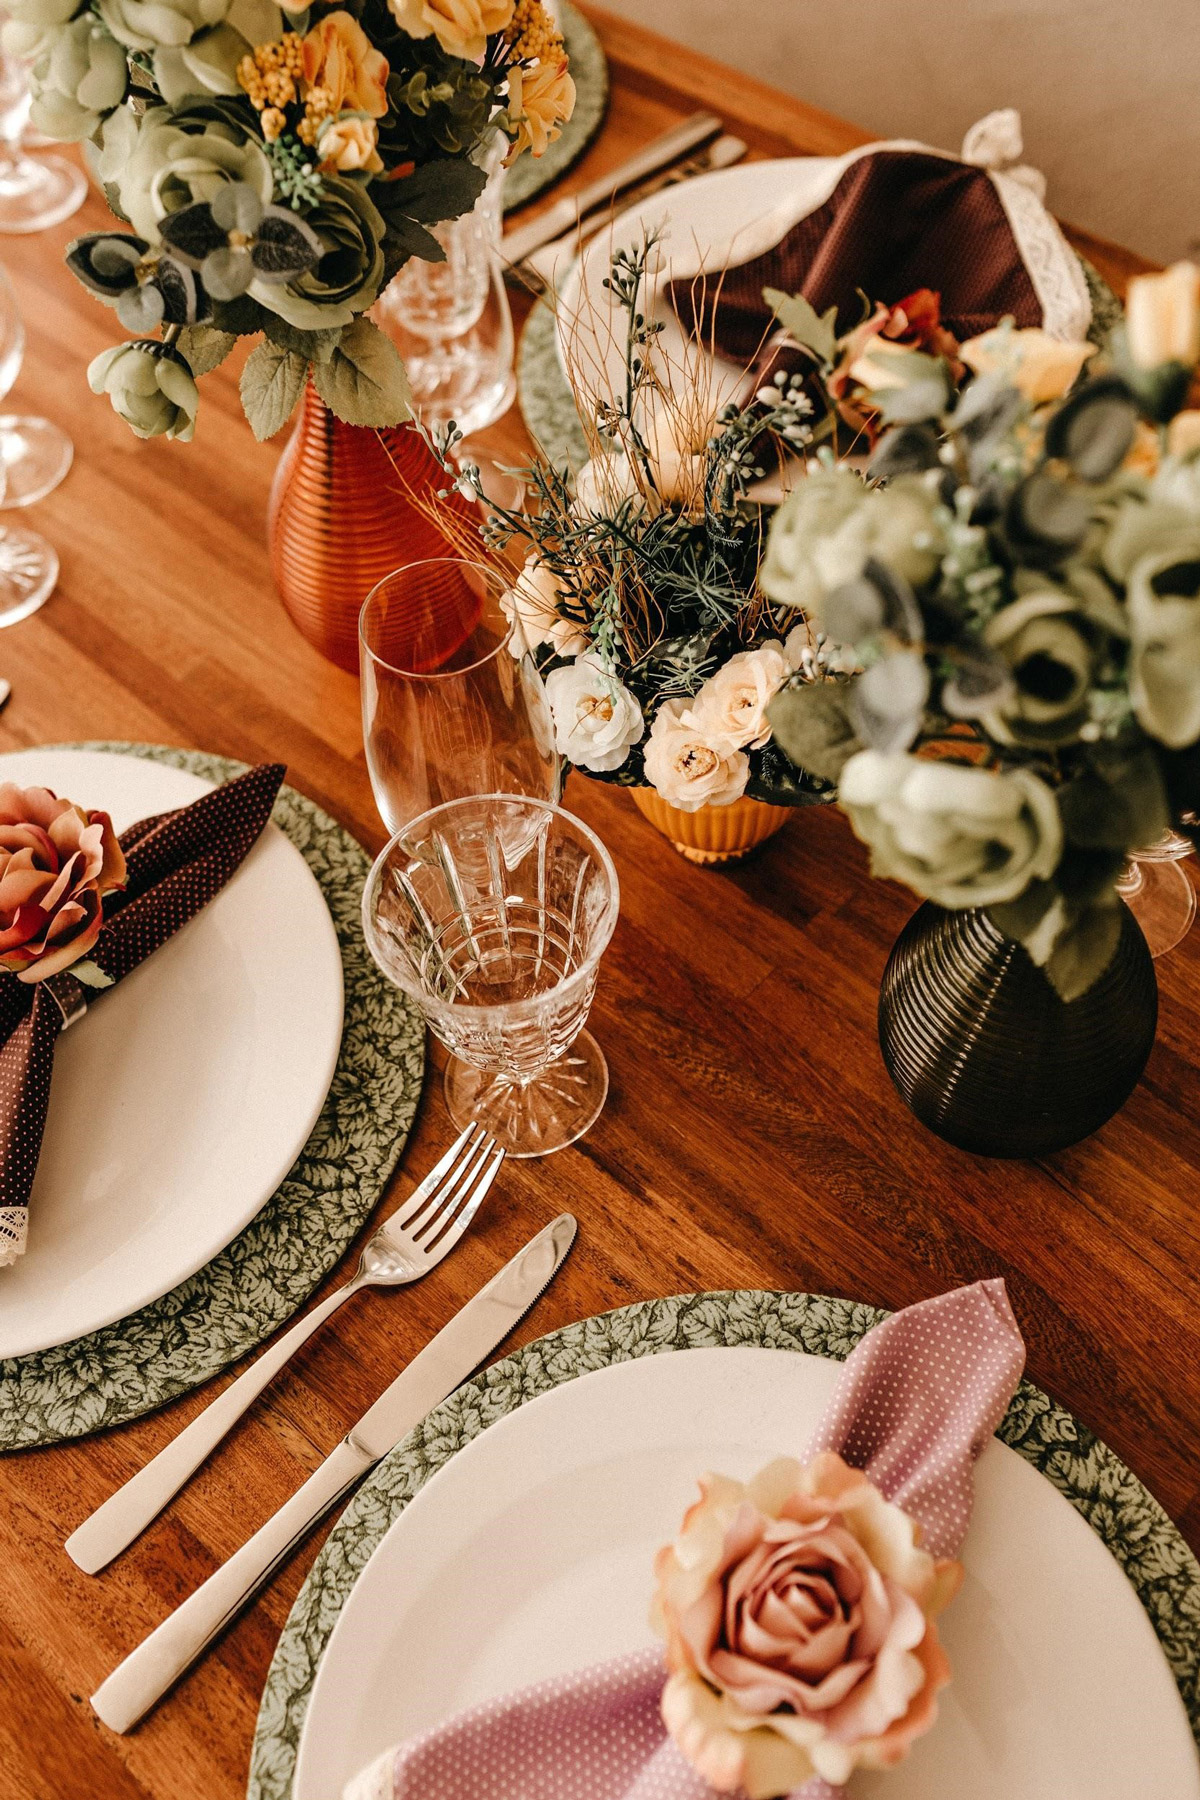 6 Expert Tips to Make the Best Out of Your Wedding Catering